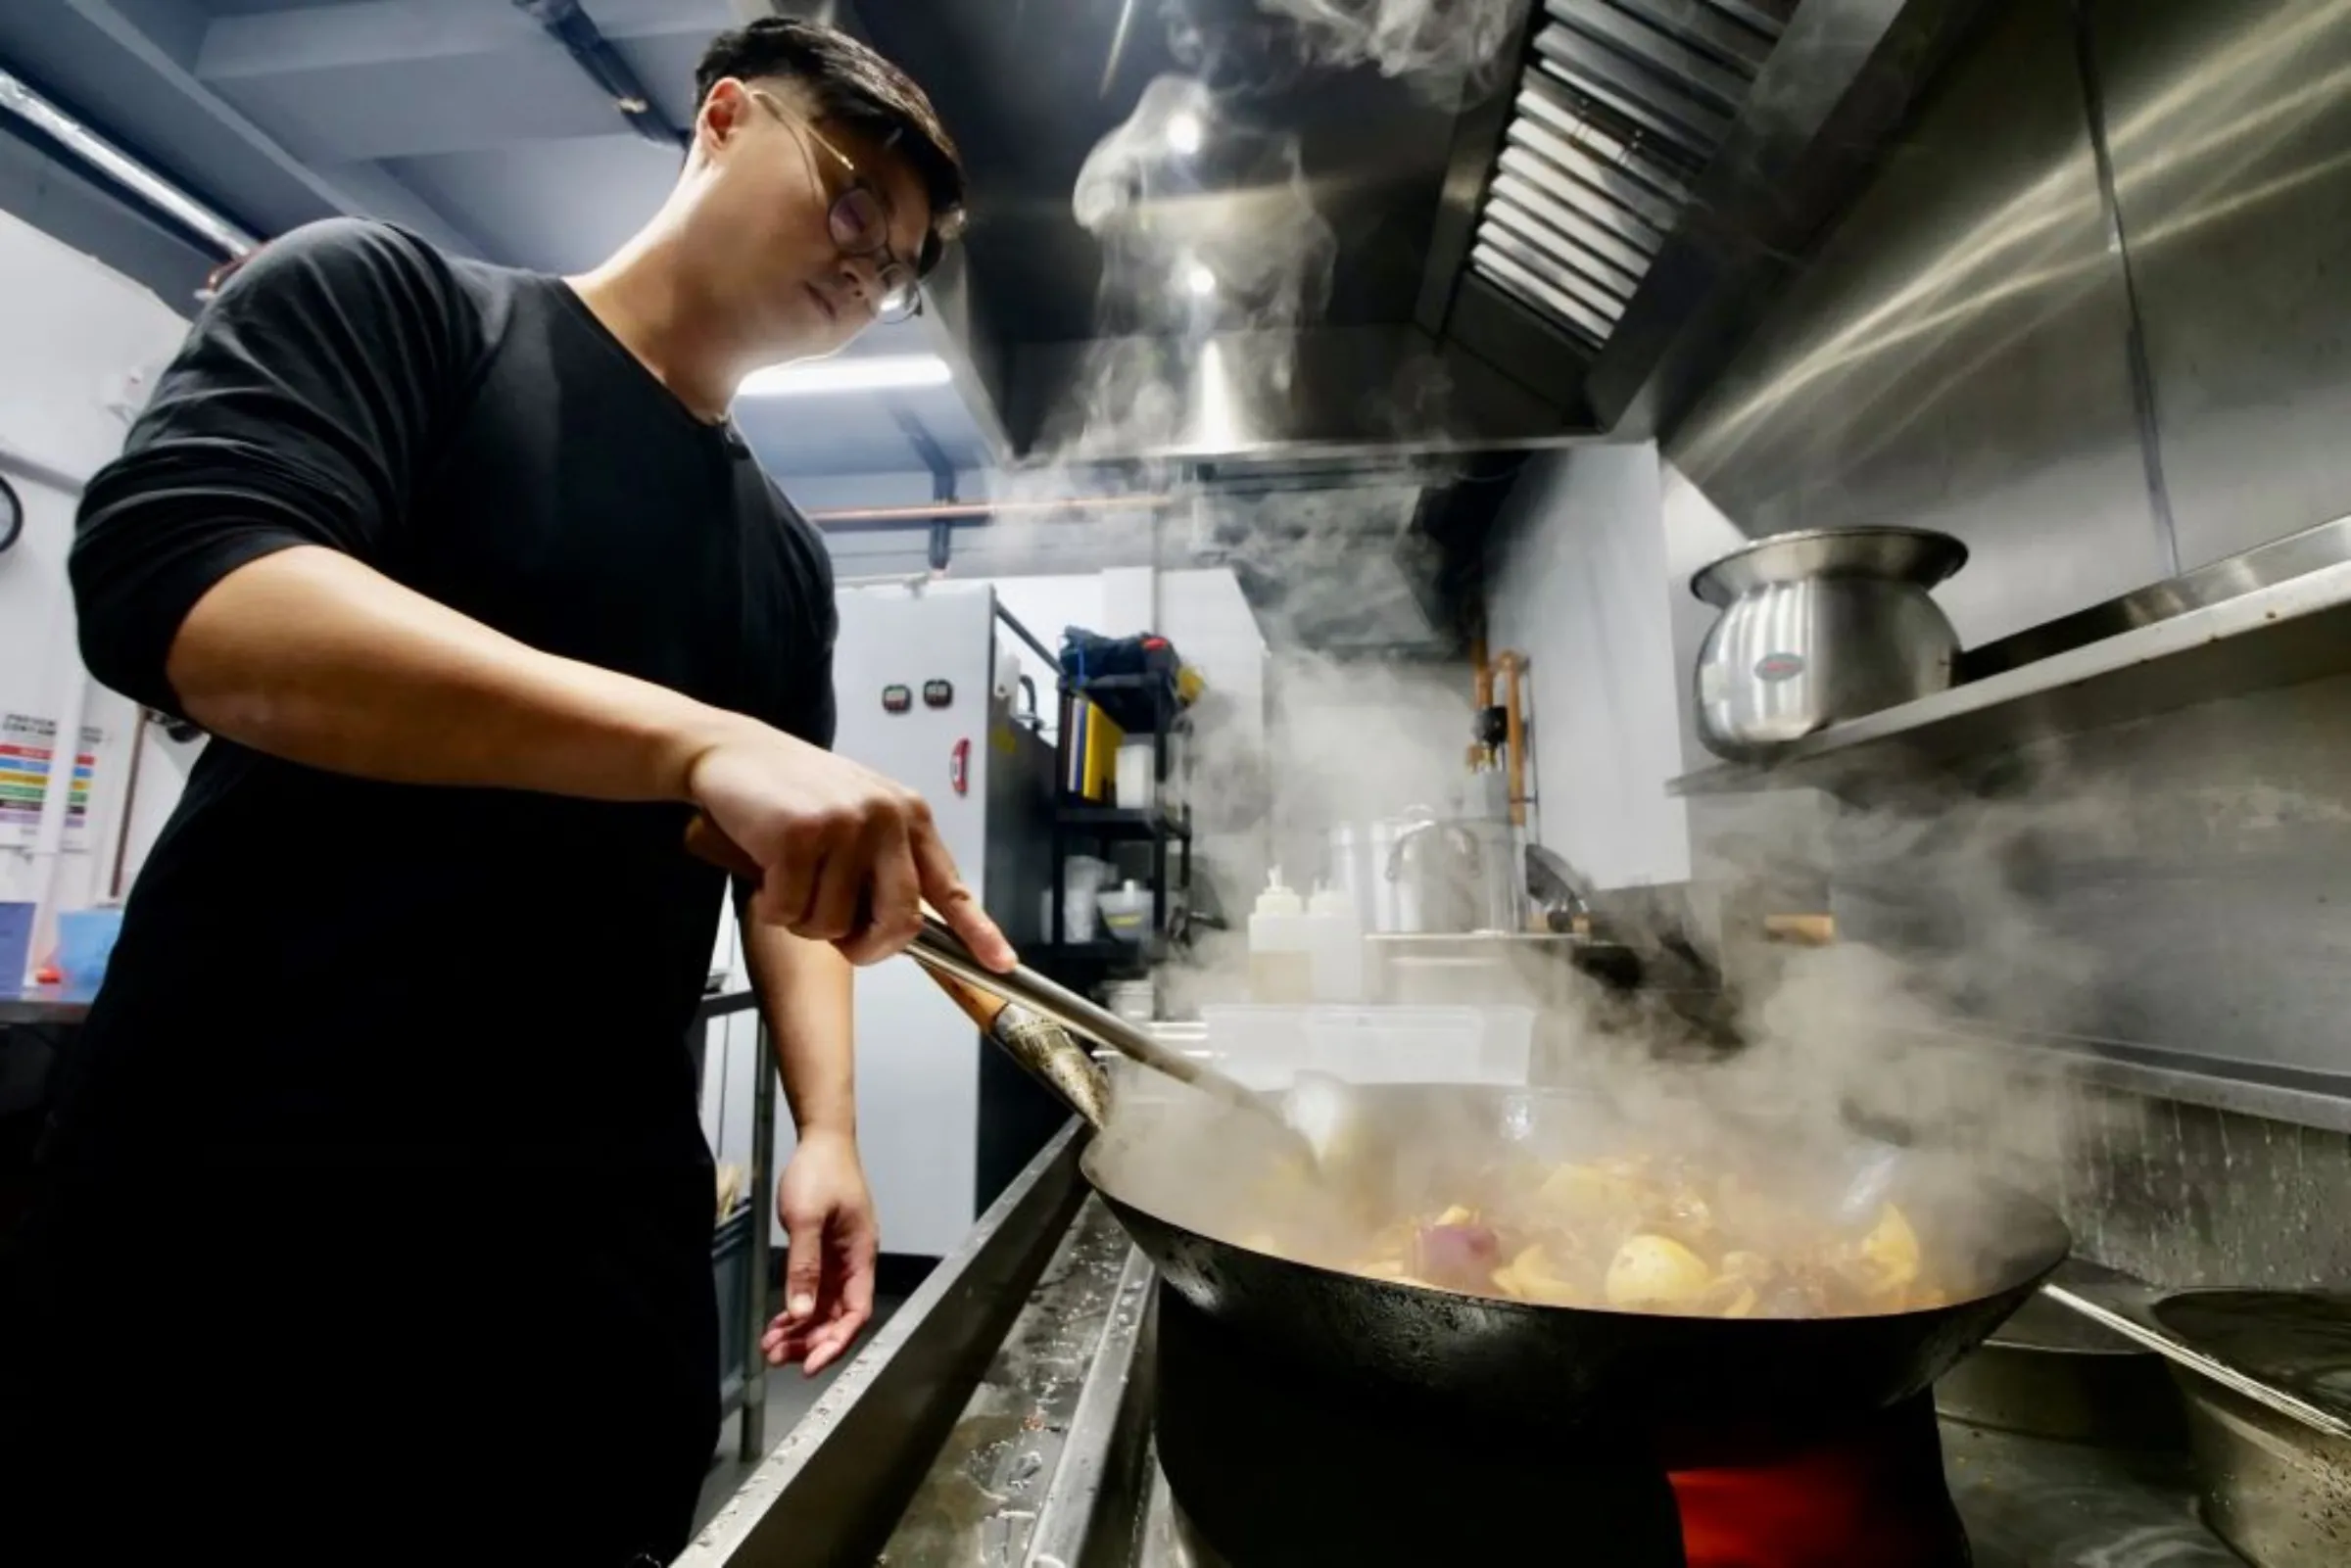 Sam Wong works in his kitchen in Croydon, south London, in September 2022. Chiu Kwan Yi/Green Bean Media/Handout via Thomson Reuters Foundation